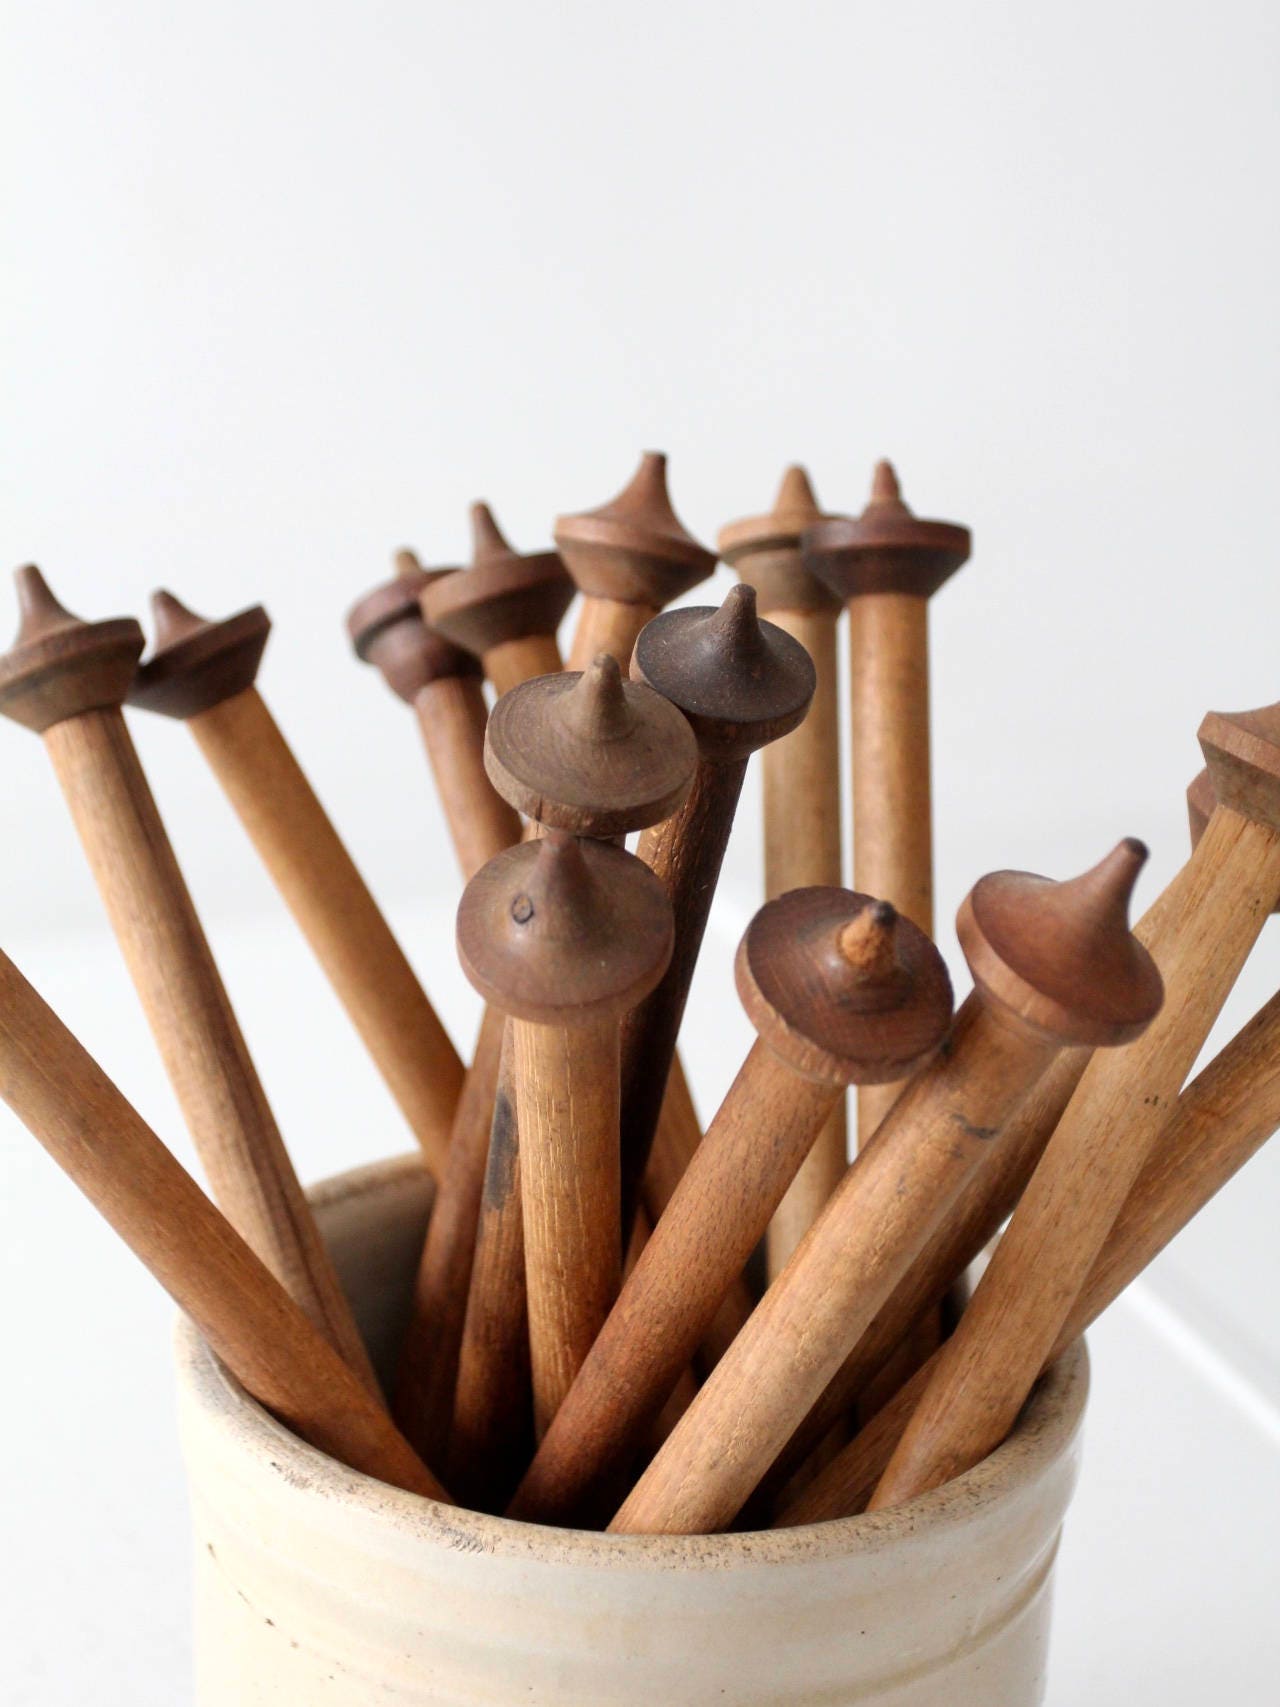 Discover the Magic of Knitting with Wooden Needles –